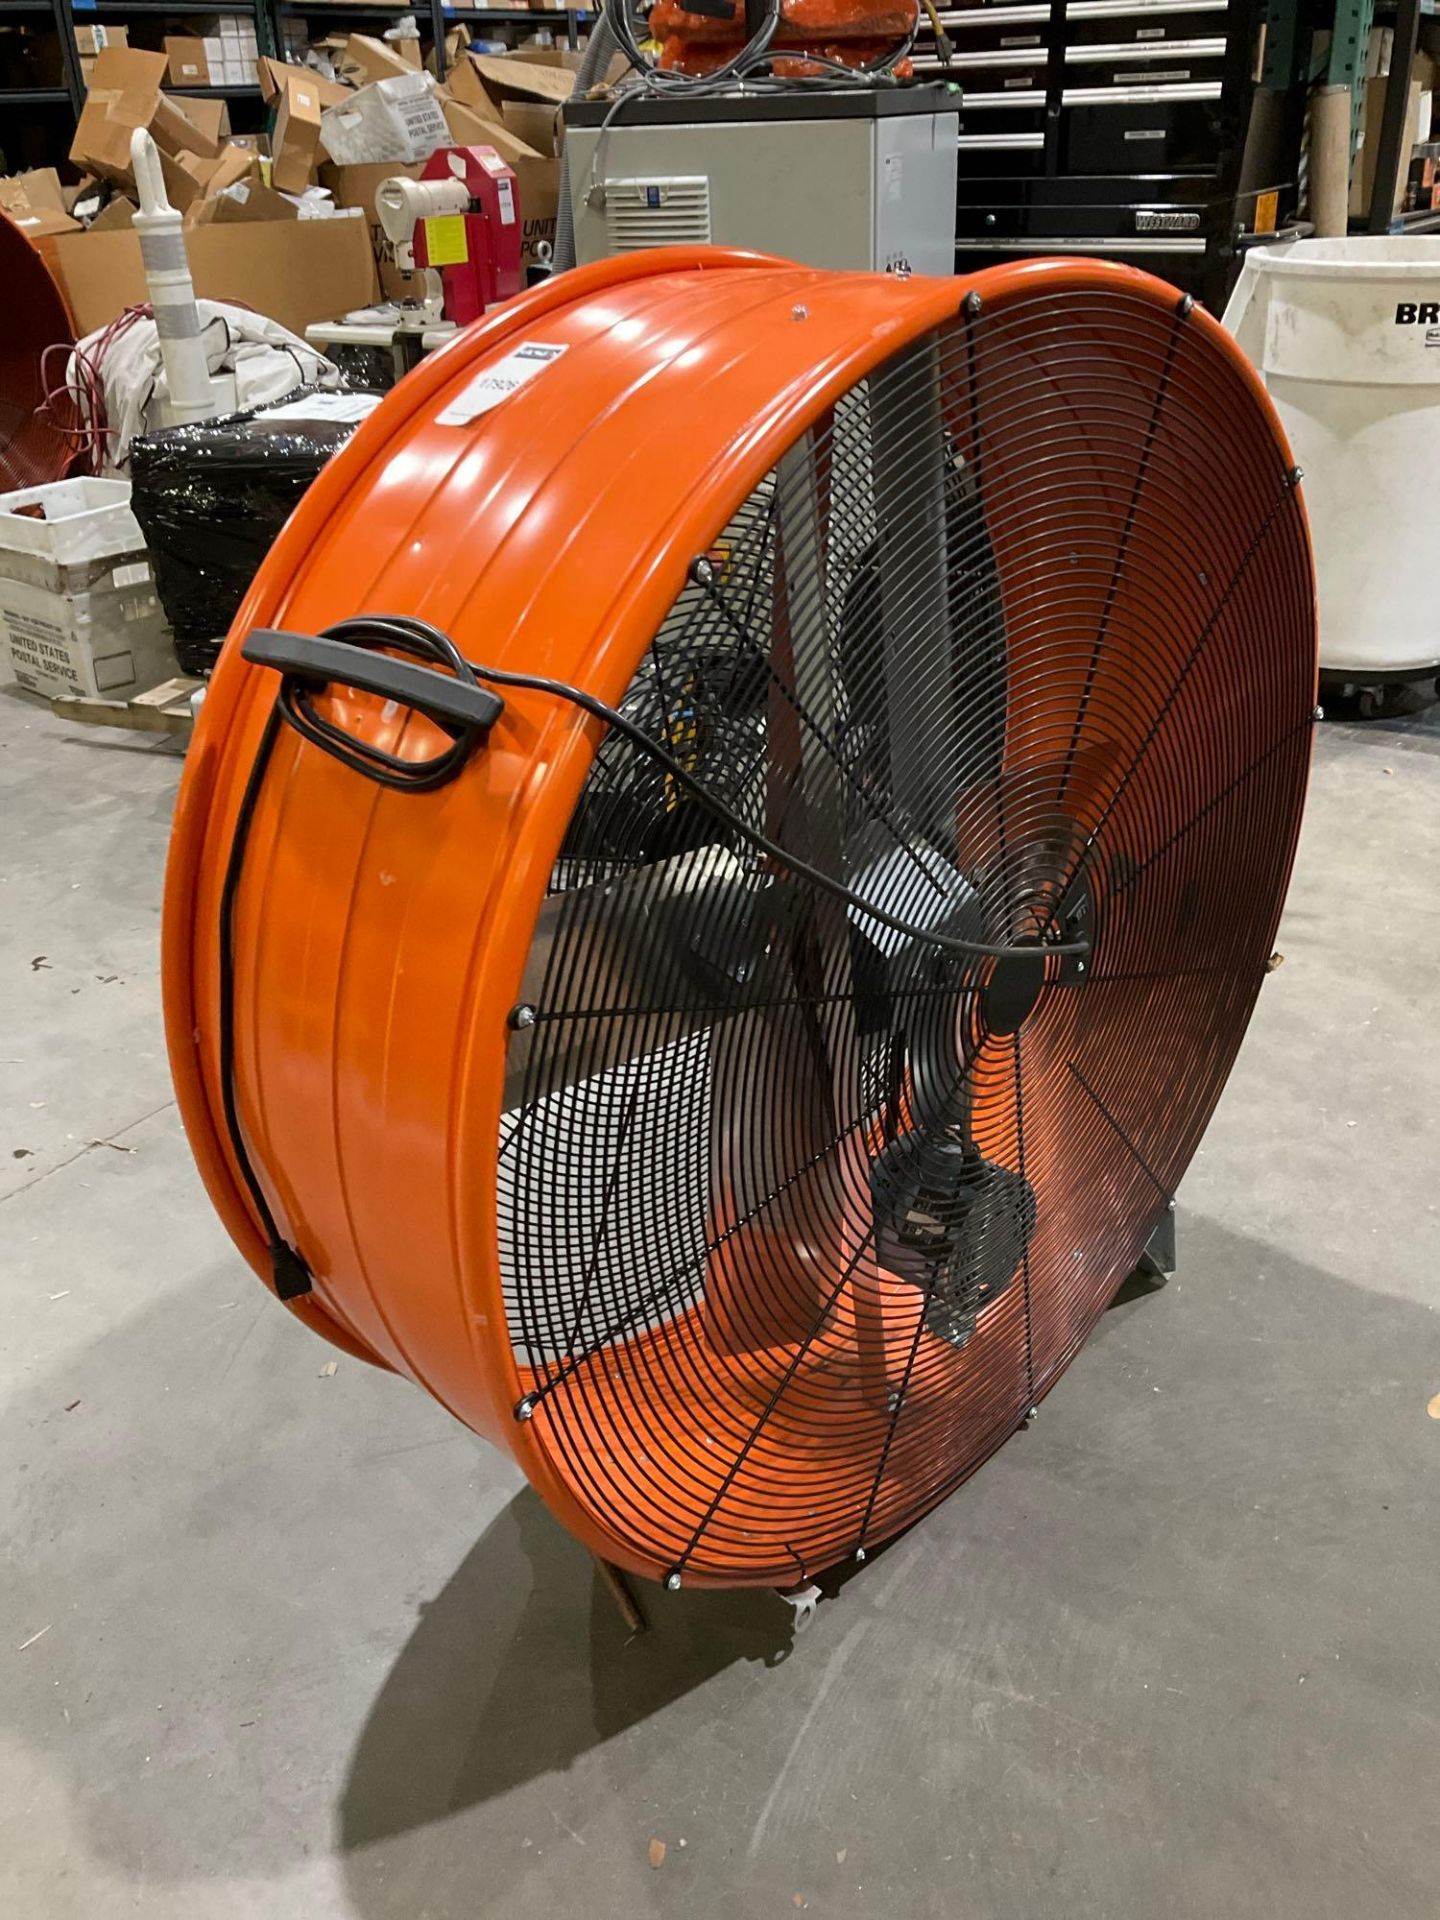 UNUSED 42" COMMERCIAL ELECTRIC PORTABLE BARREL FAN - Image 4 of 8